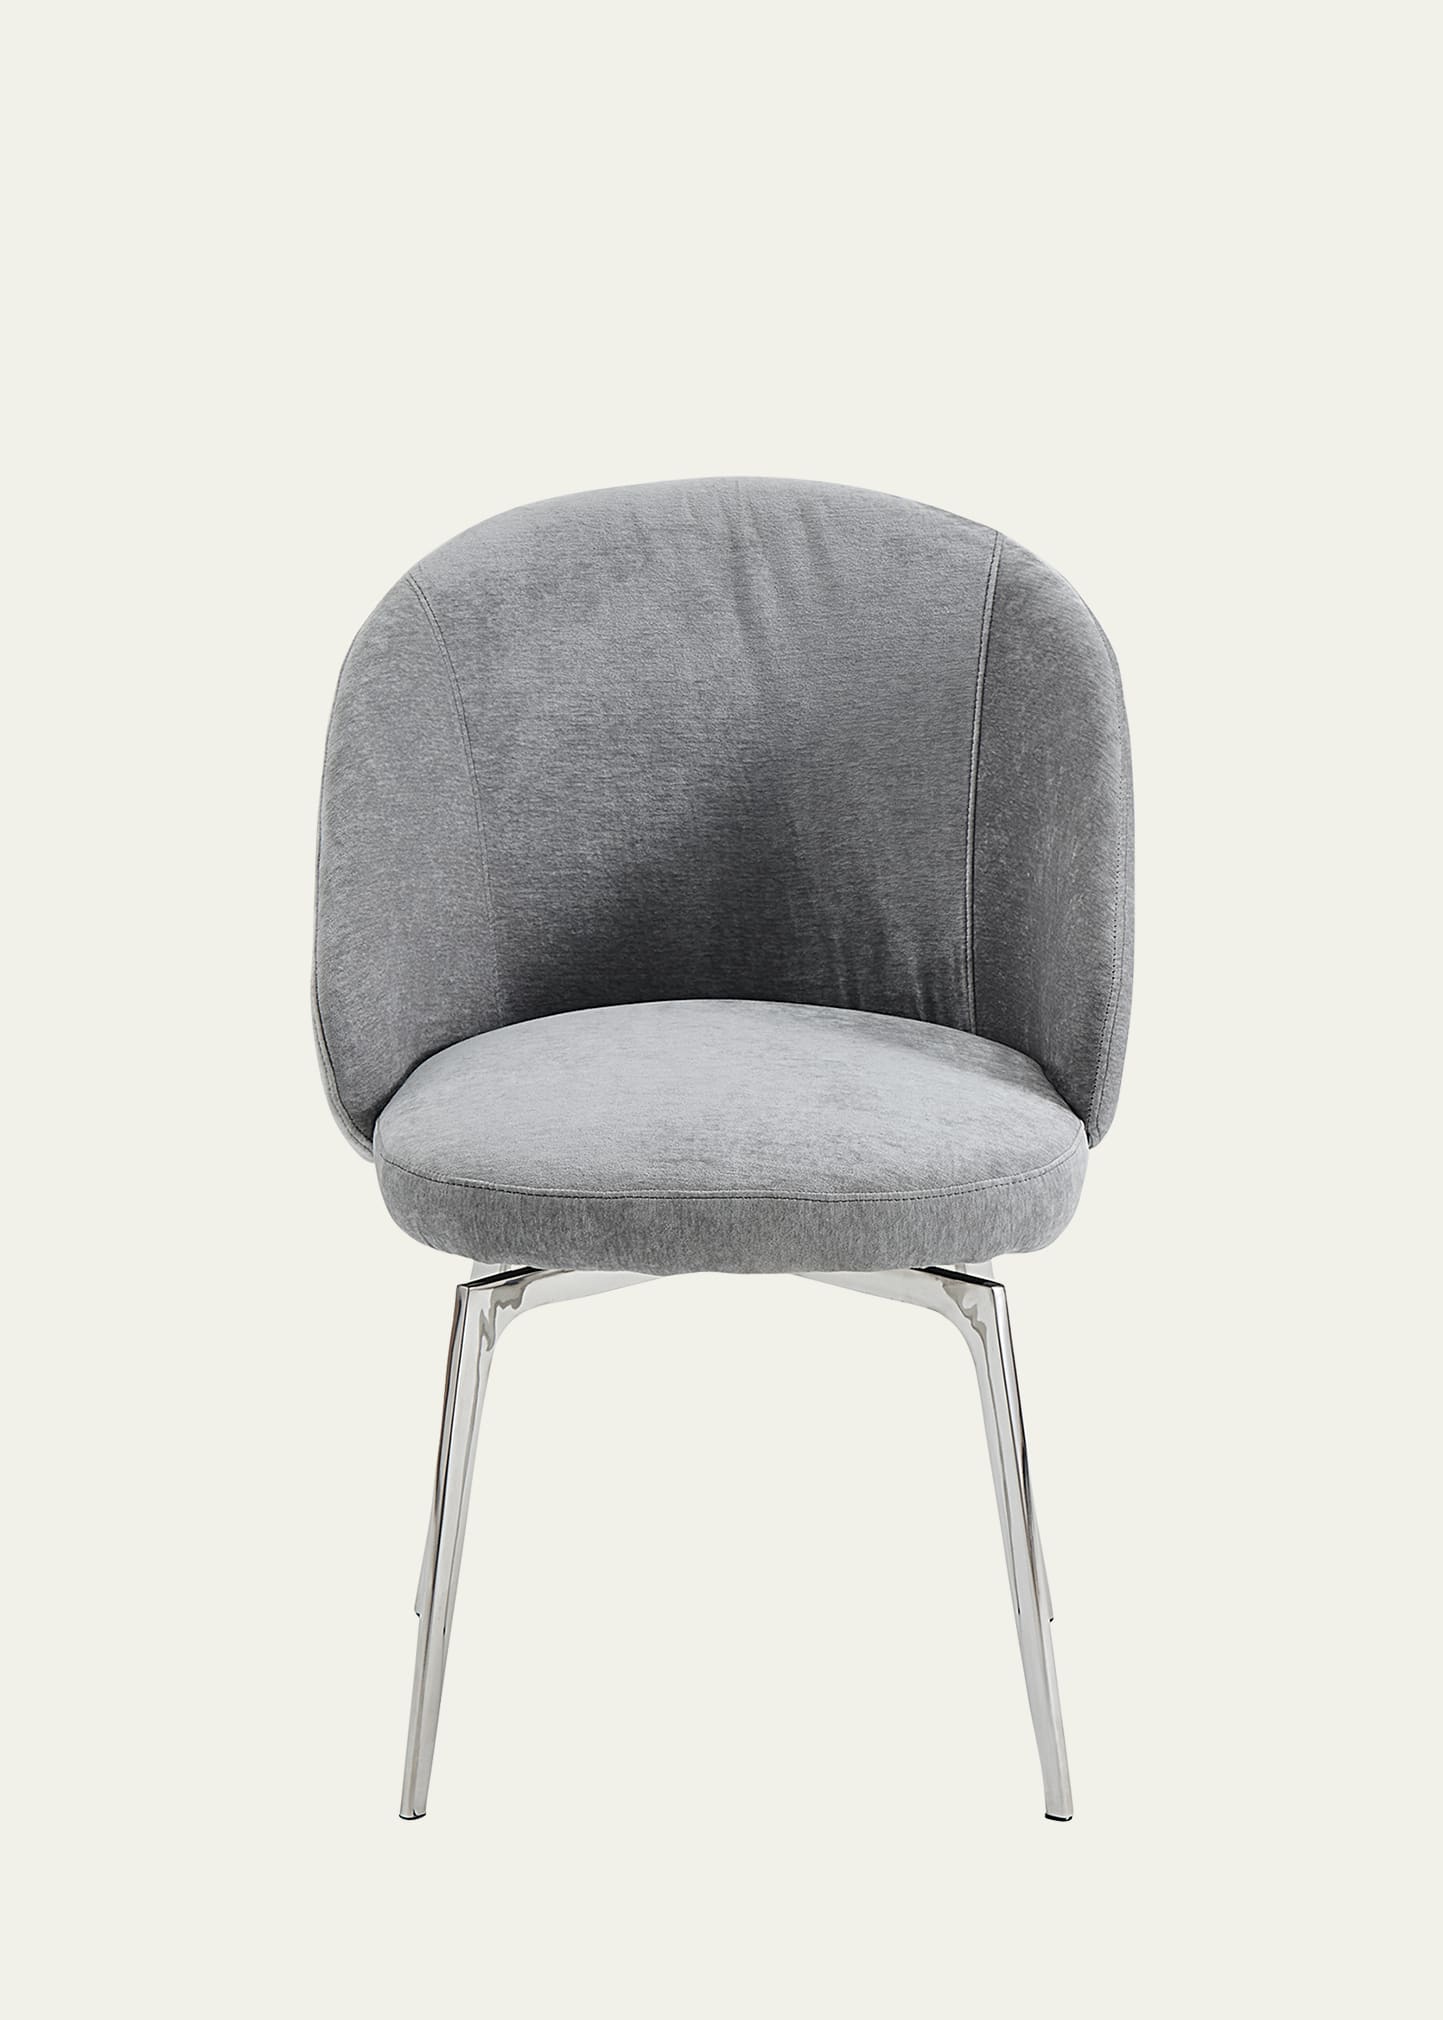 Interlude Home Amara Dining Chair In Gray